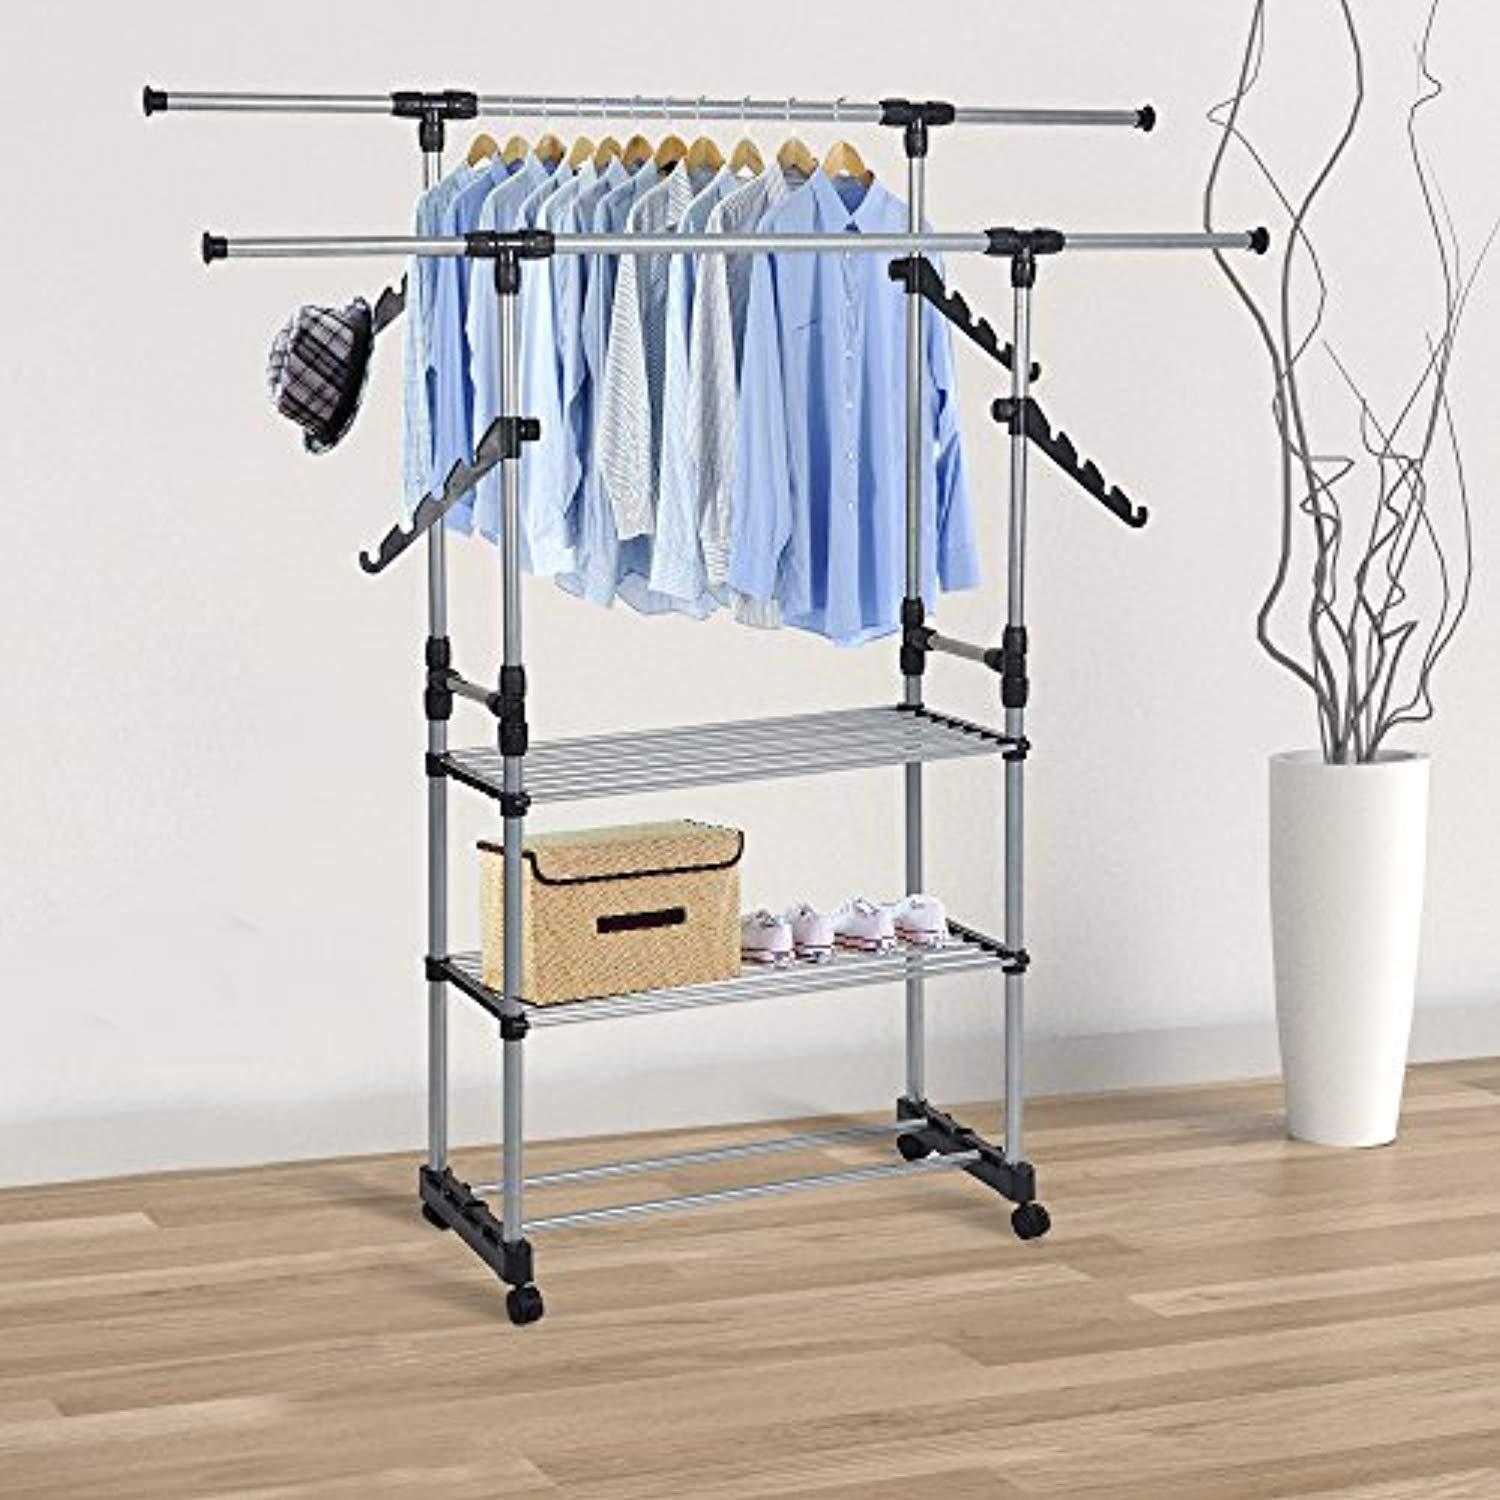 Bosonshop Folding Double Rails 3-Tier Clothes Rack with Shelf and Wheels